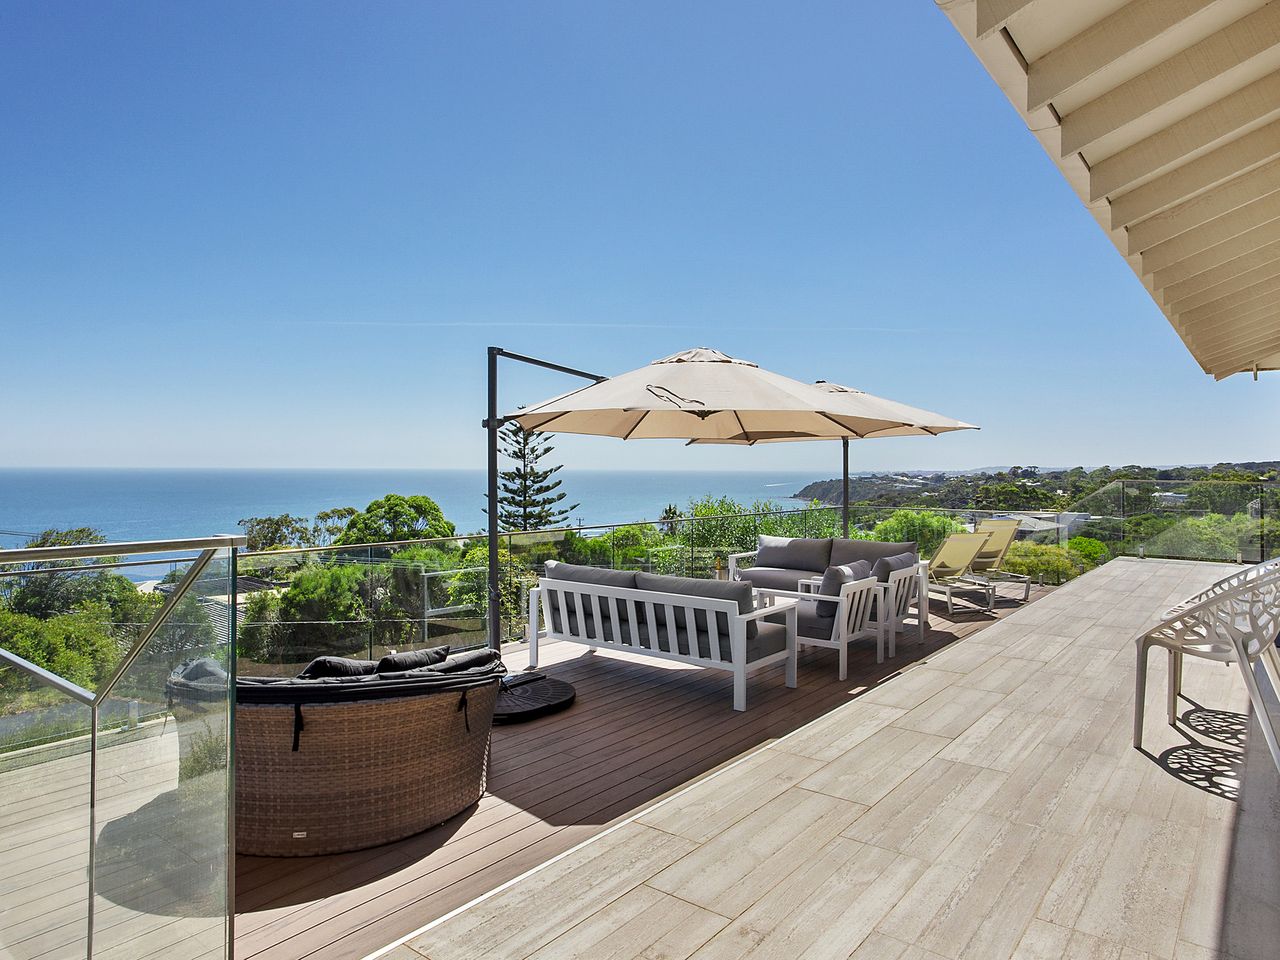 Property Image 1 - Panorama Bay - 4 Bedrooms, Large Entertaining Deck with Panoramic Bay Views